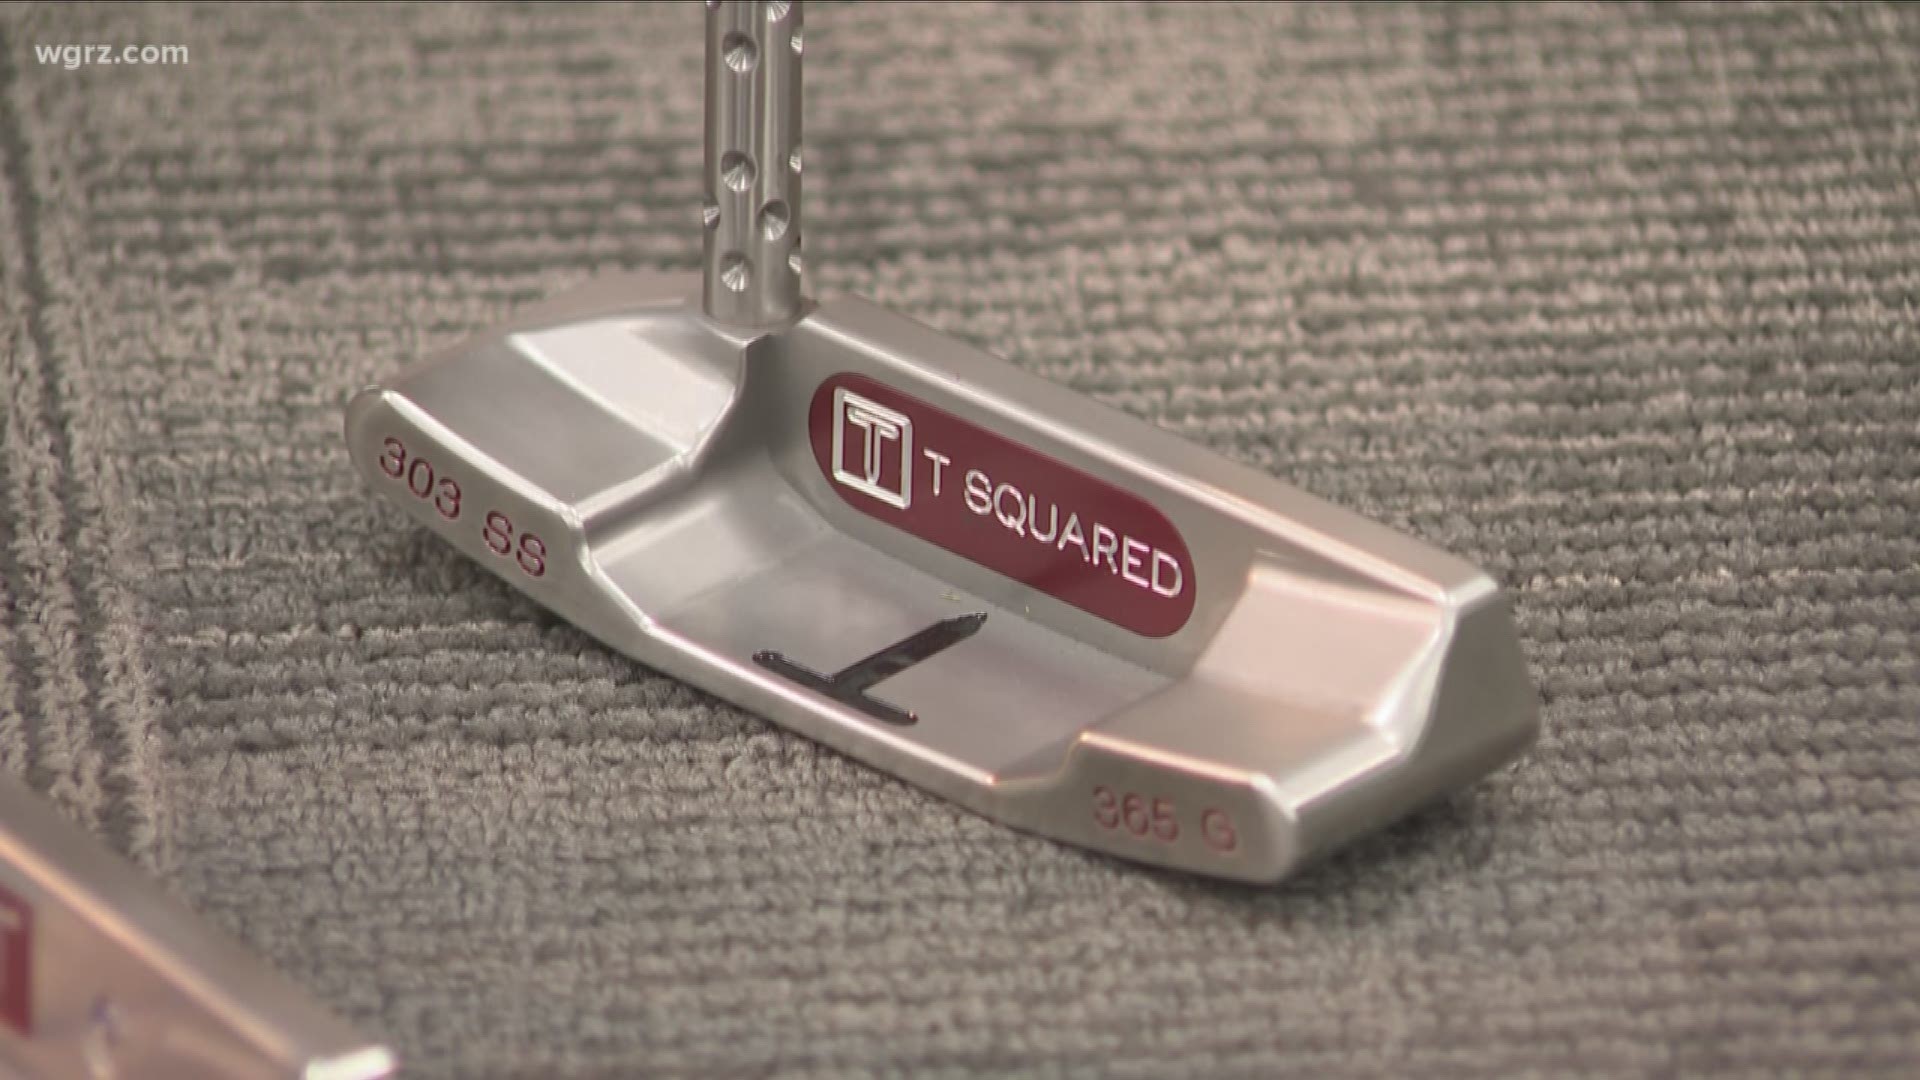 Kevin Sylvester is with Tony and Mike Tuber from T Squared Putters to learn why their putters are so unique. (SPONSORED CONTENT)